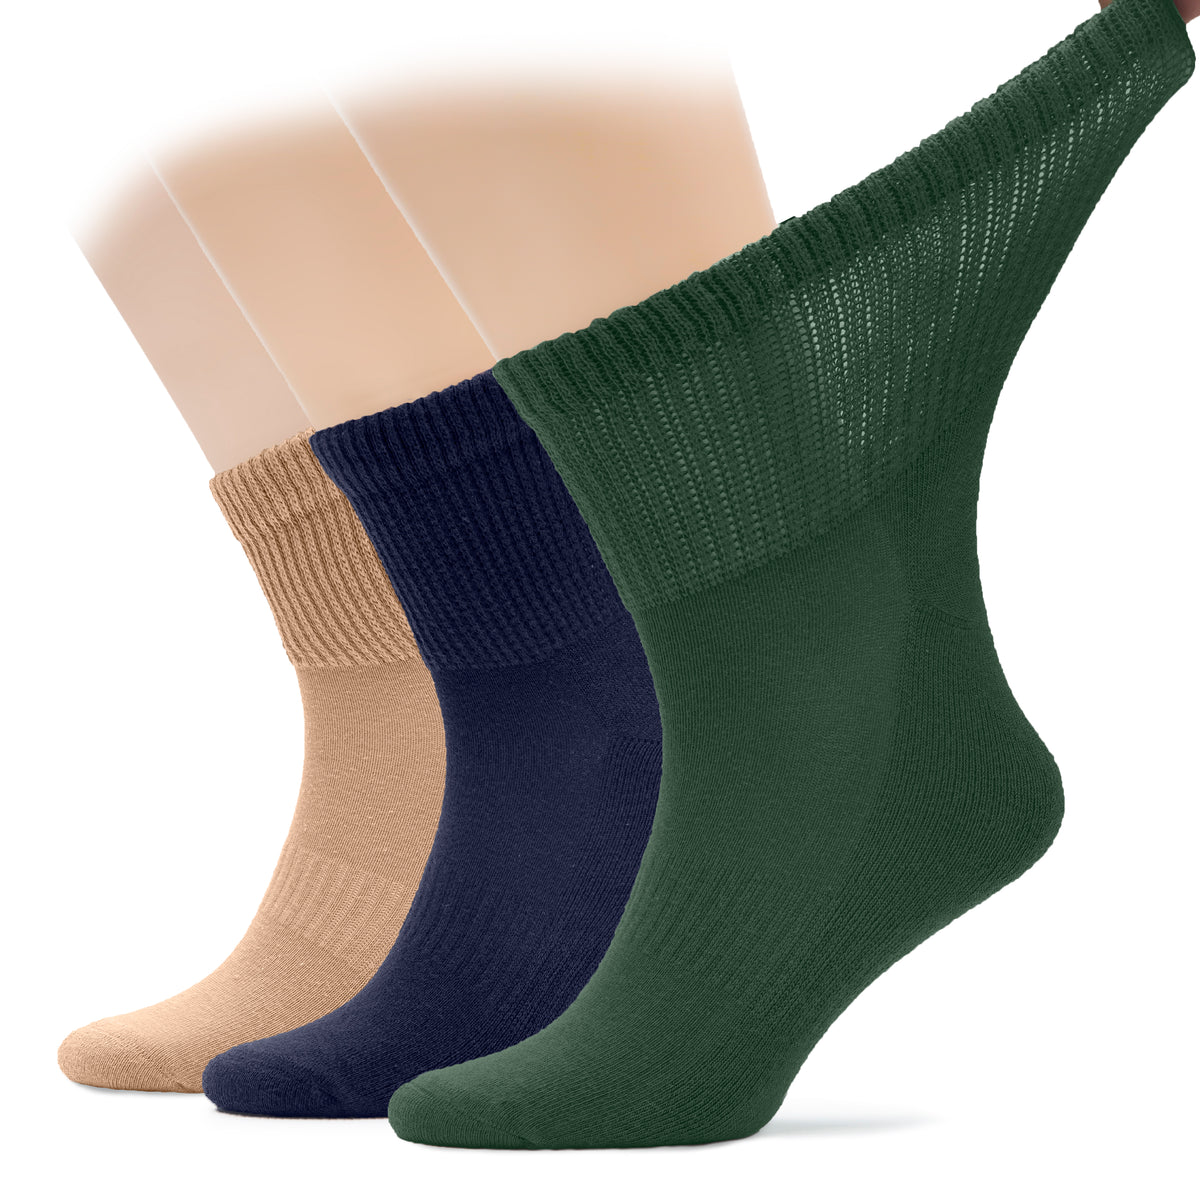 This image depicts three pairs of women's socks in different colors, suitable for everyday wear. These socks are not Men's Diabetic Ankle Socks.